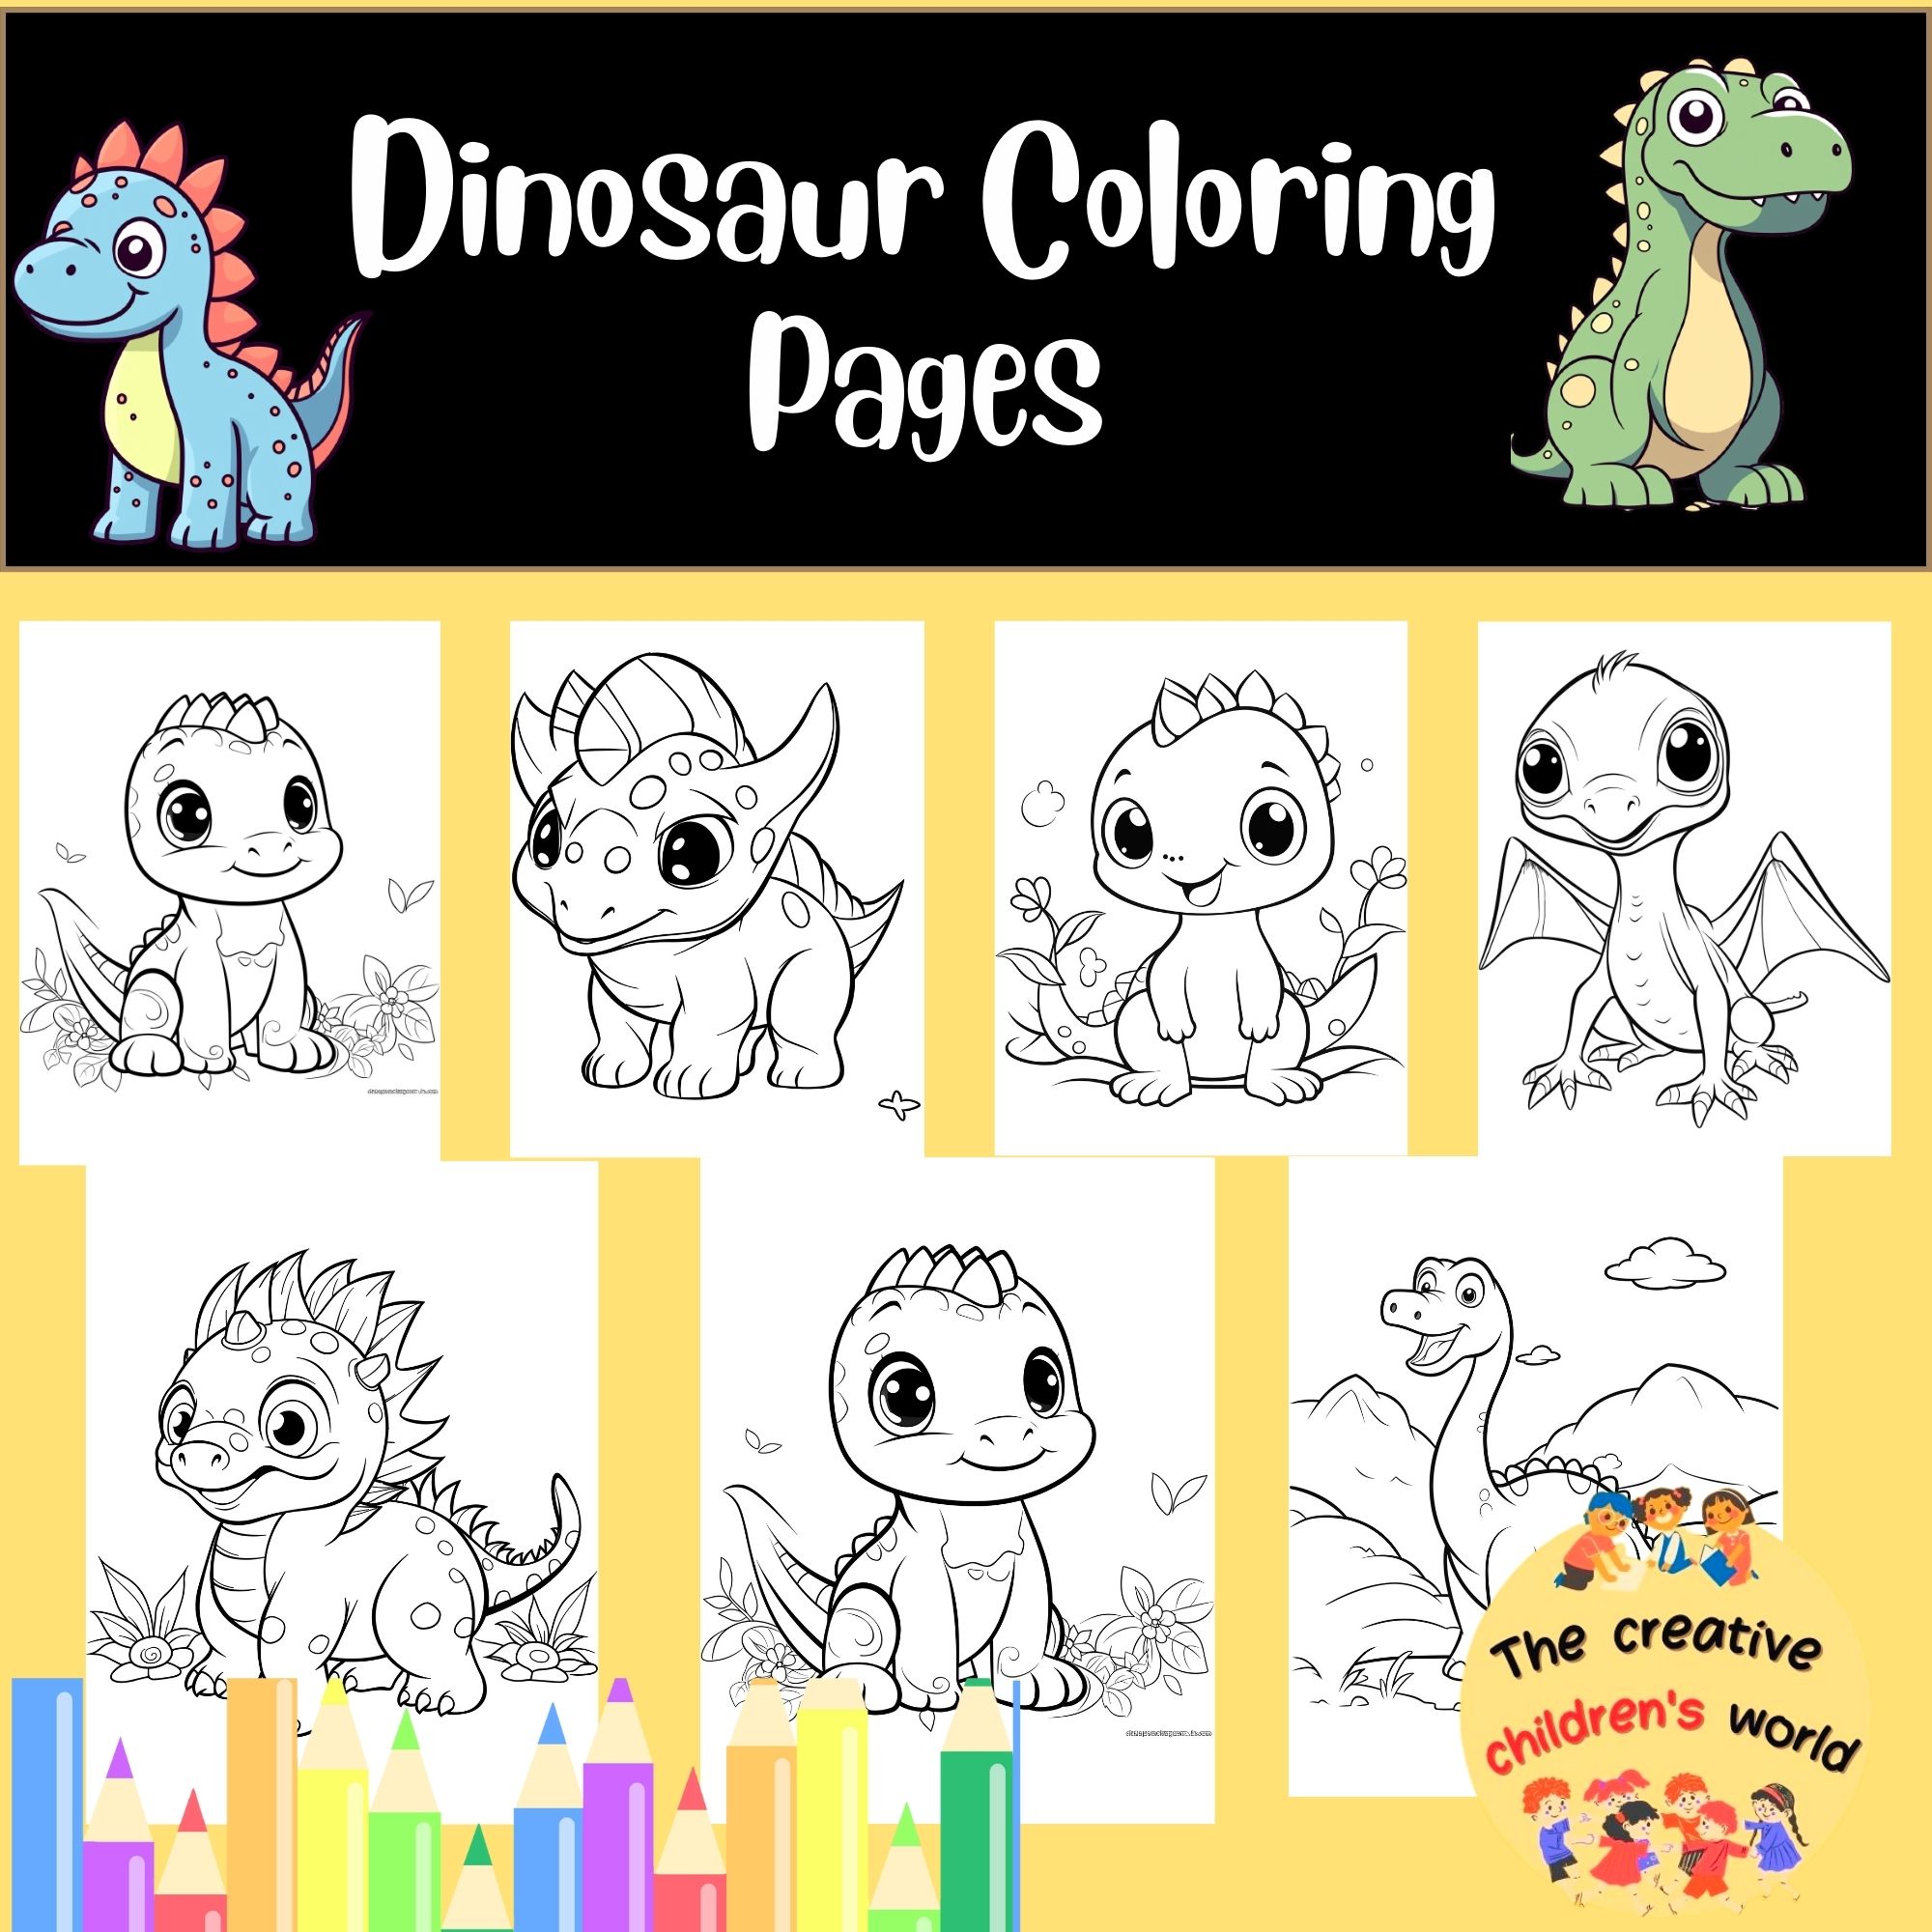 Dinosaurs coloring pages made by teachers